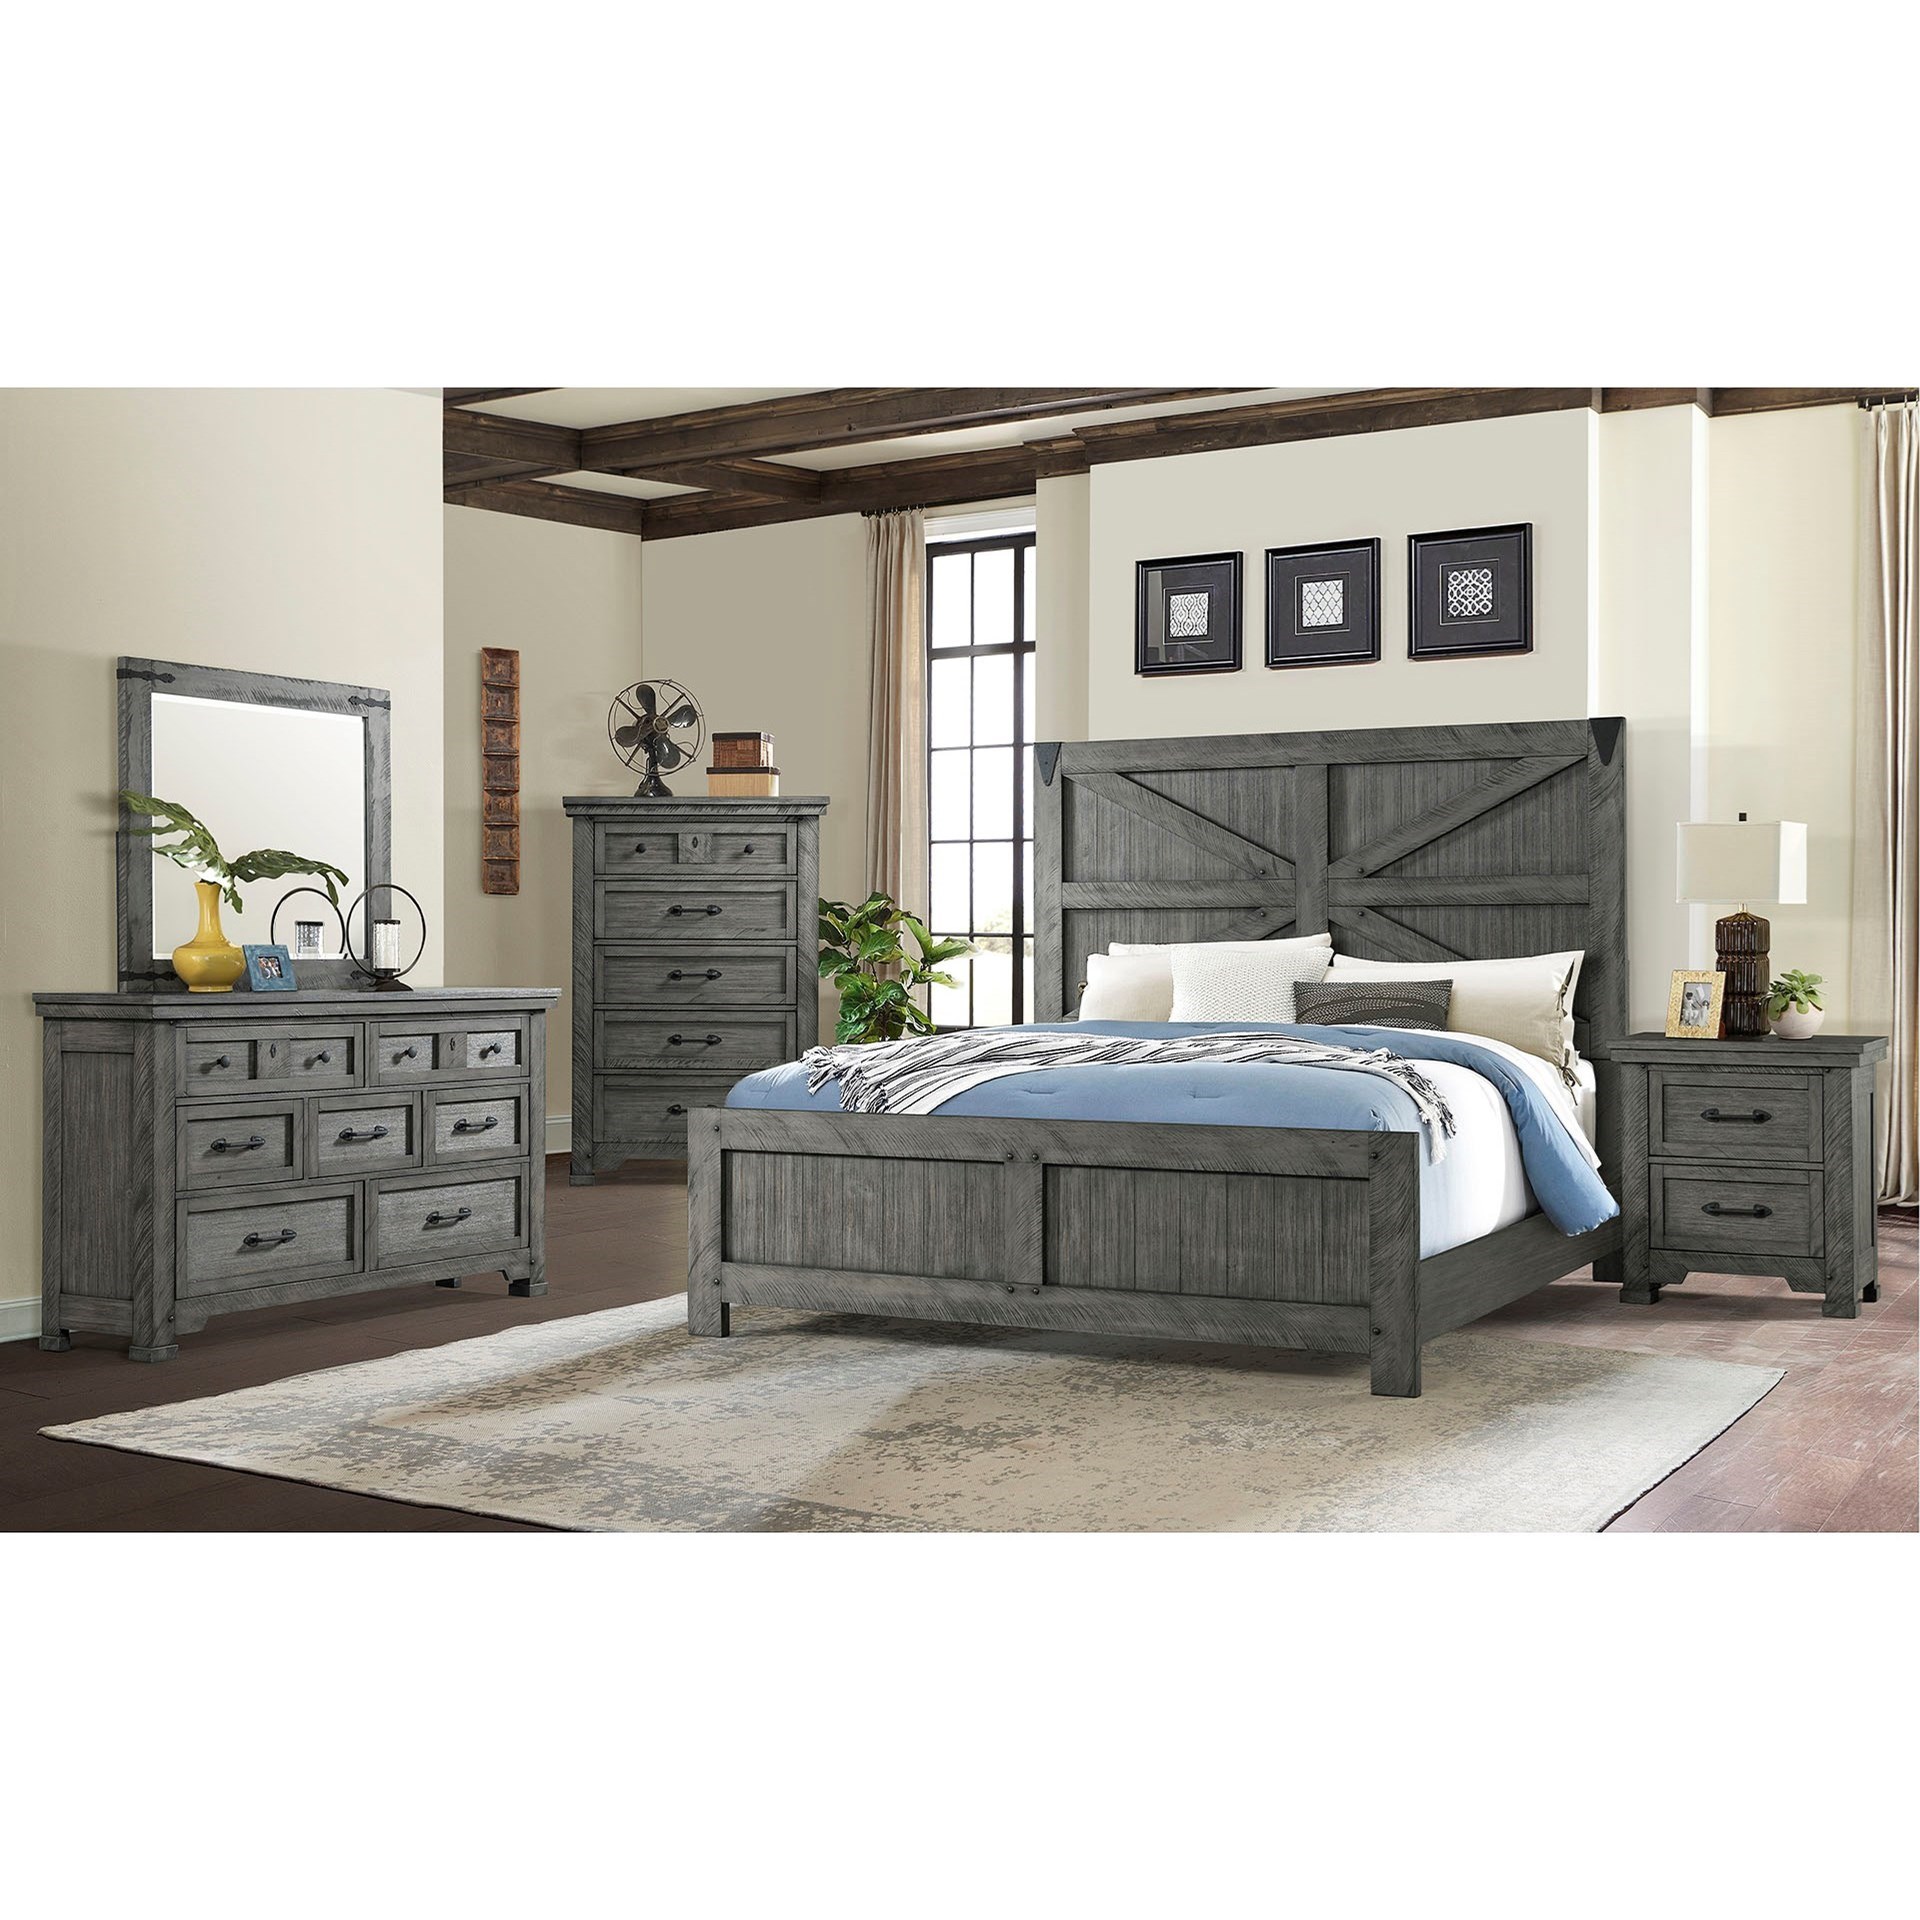 1062 Old Forge Bedroom Group